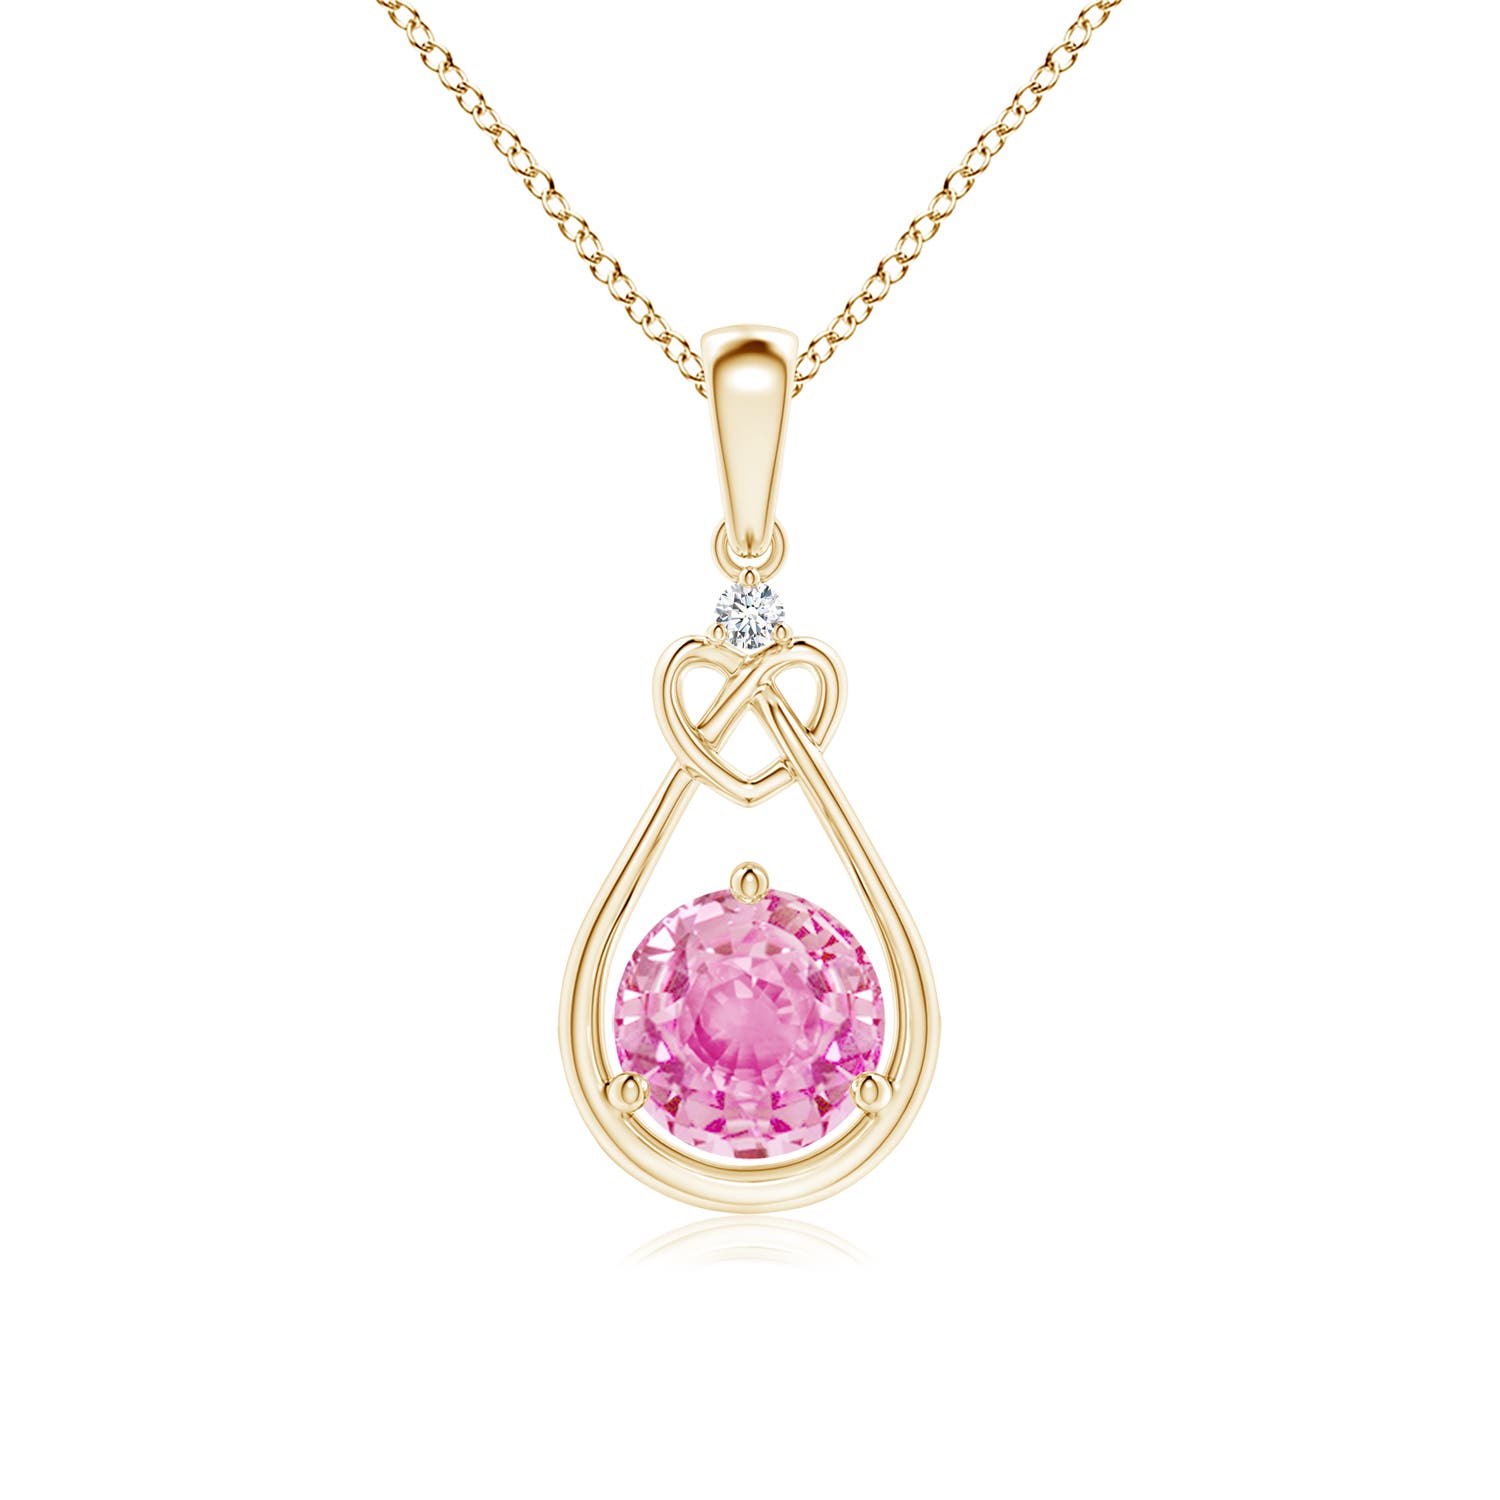 A - Pink Sapphire / 1.01 CT / 14 KT Yellow Gold